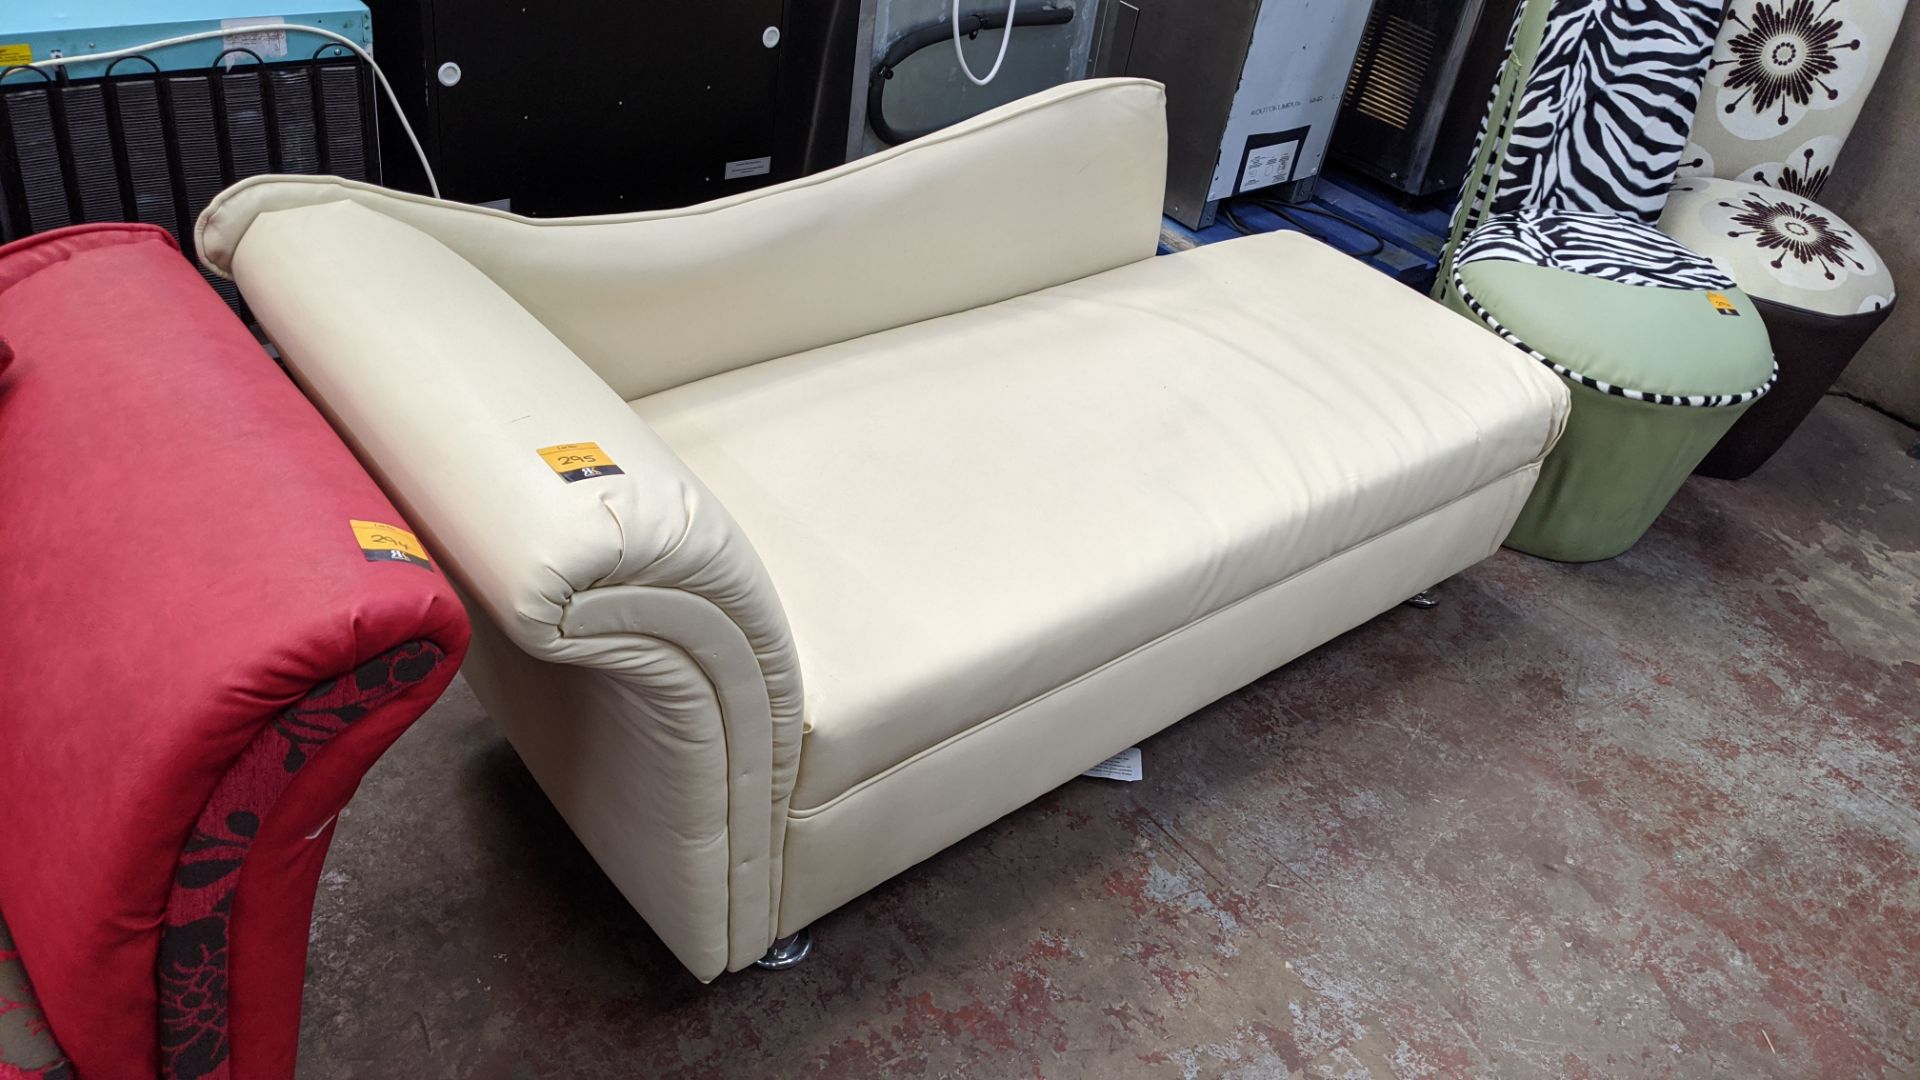 Cream coloured chaise longue with max. dimensions approx. 1650 x 600 x 700mm - Image 2 of 3